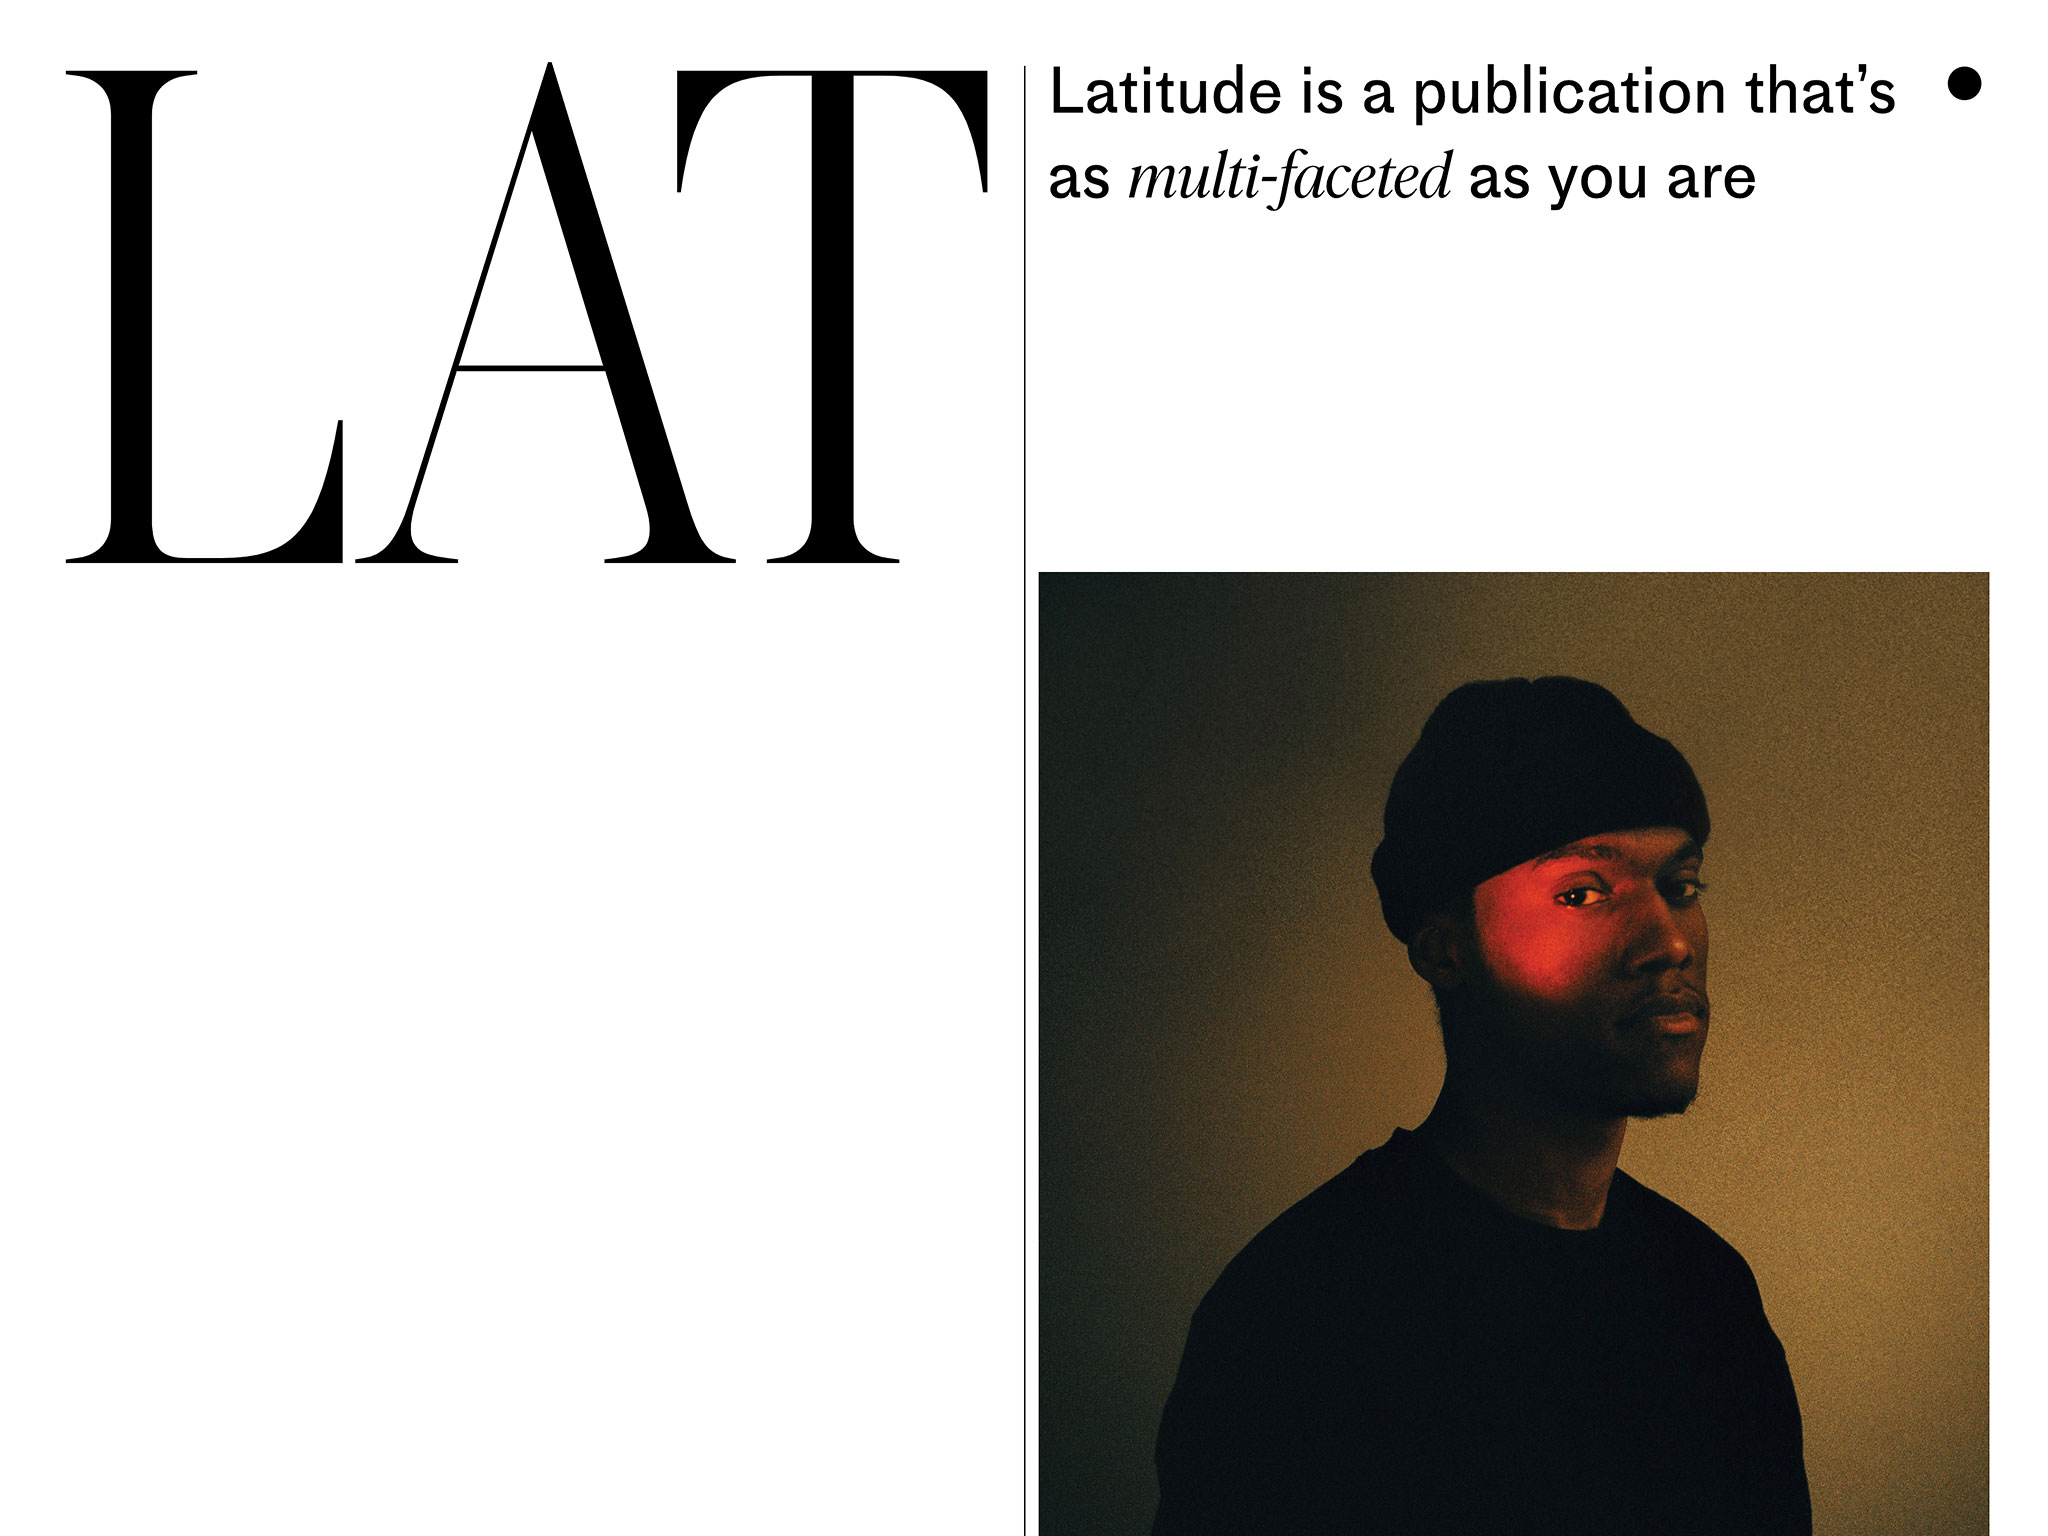 Latitude – Latitude is a publication that’s as multi-faceted as you are